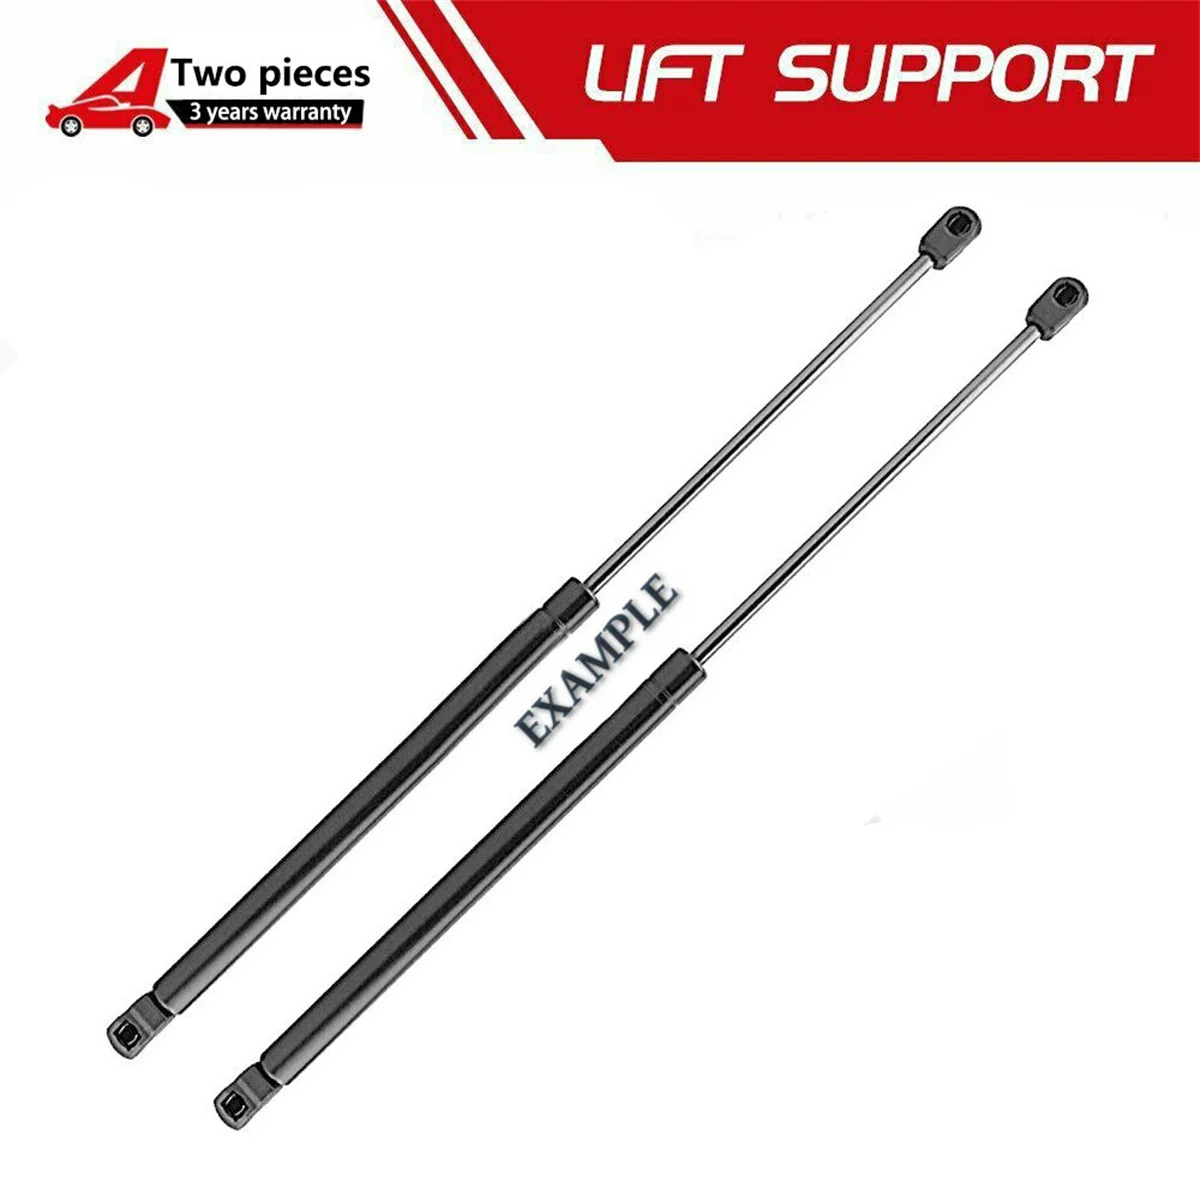 

For Volkswagen Touareg 2004 05 06 07 08 09 2010 Qty2 Front Hood Lift Supports Shocks Struts Spring Extended Length [in] 21.18